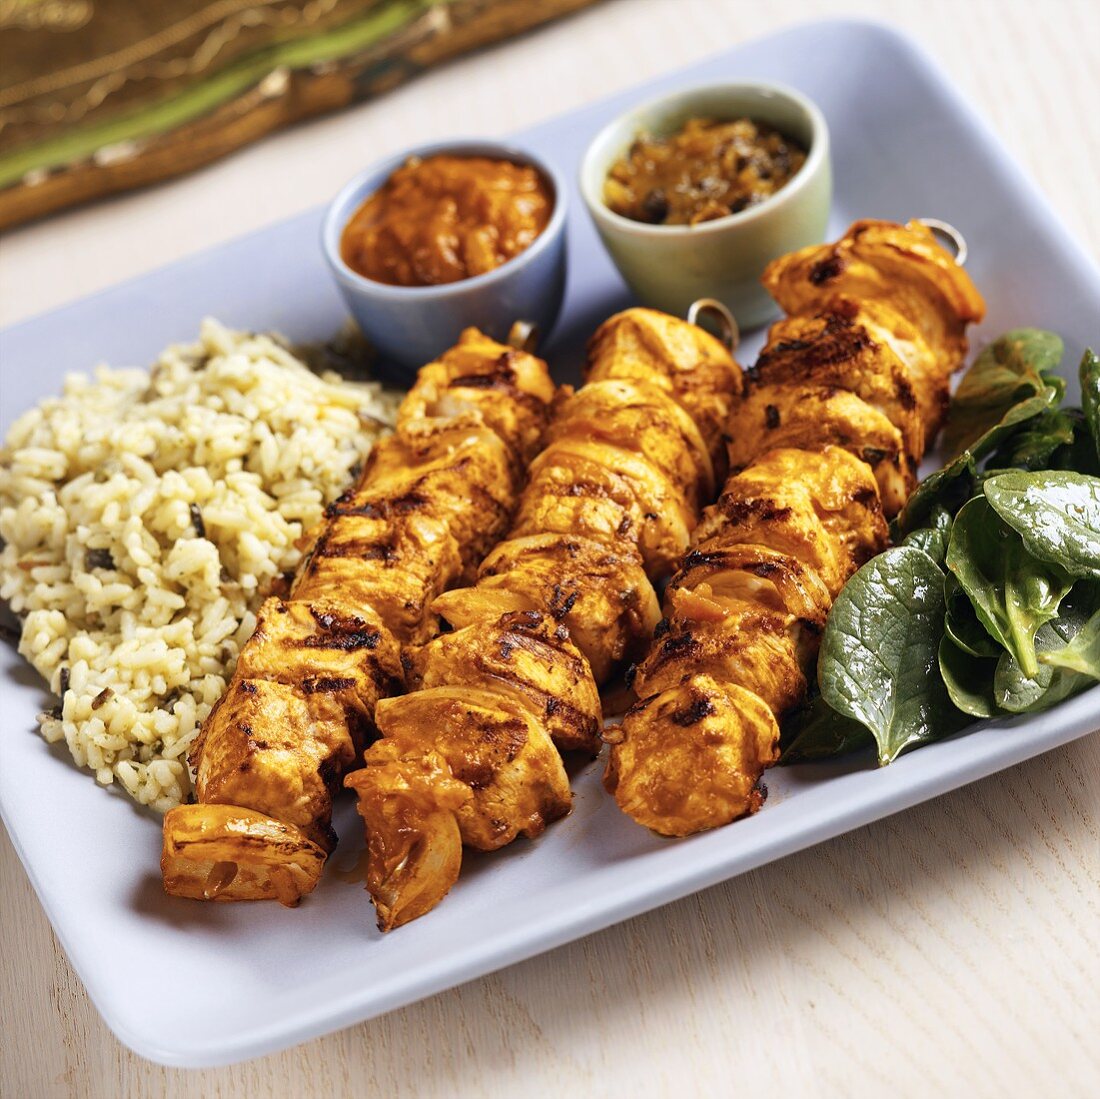 Grilled Chicken and Onion Skewers with Indian Masala, Chutney, Rice and Spinach